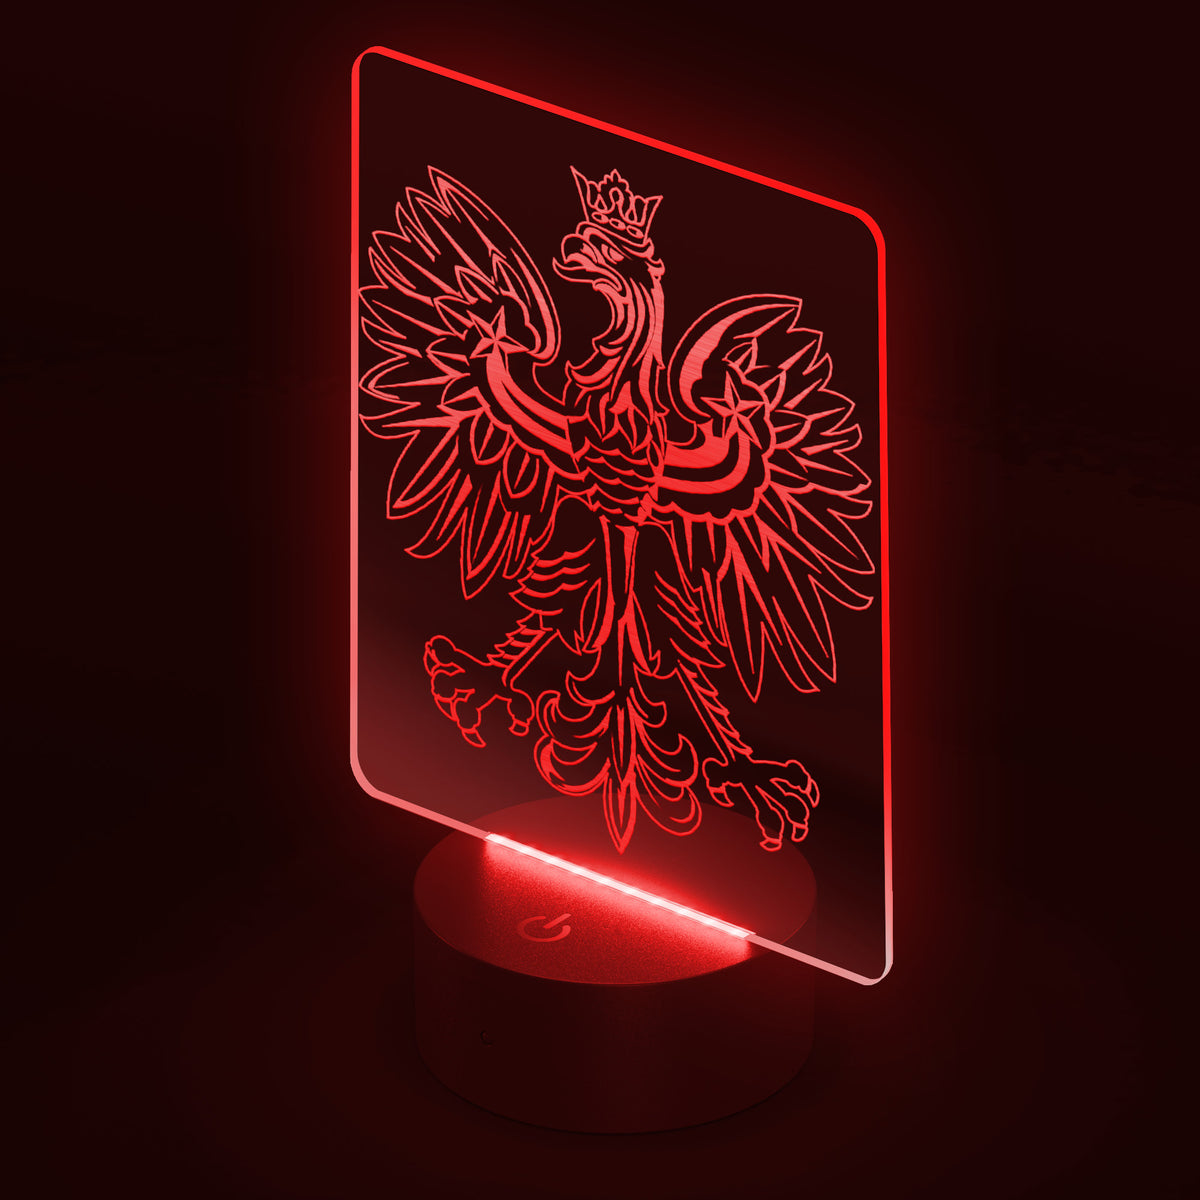 Red Proud of my polish roots metal sign polish pride heritage